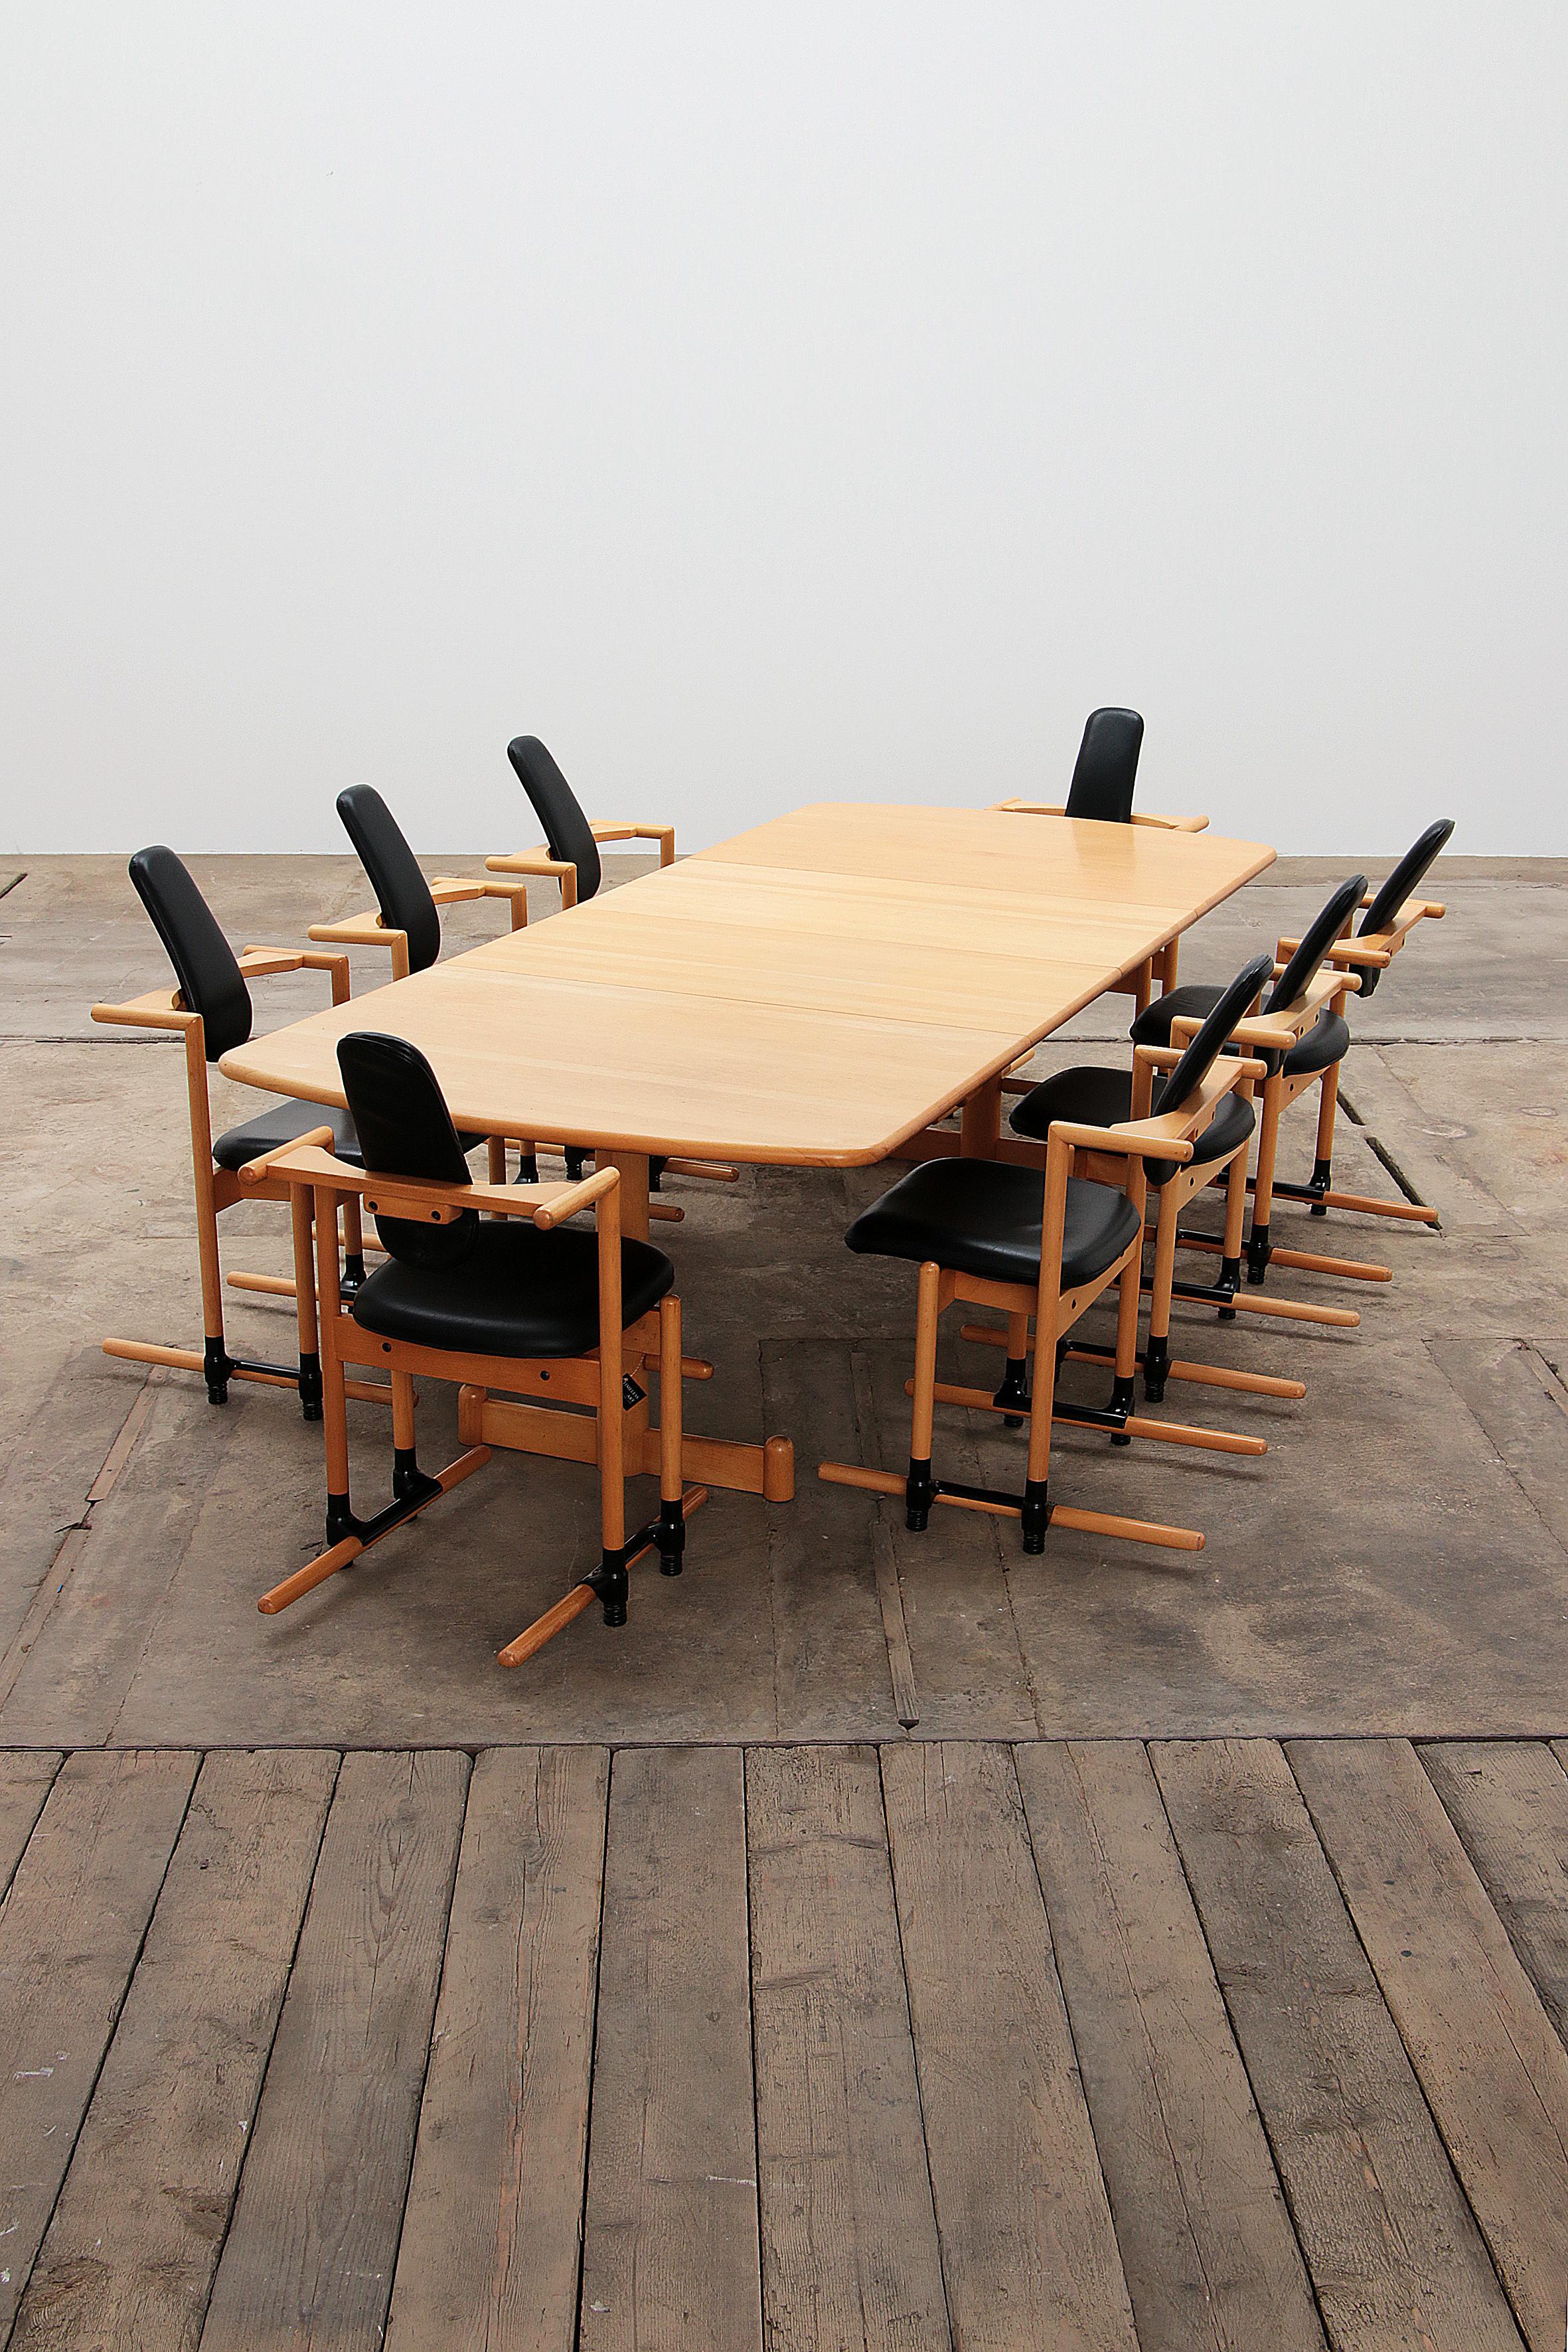 Scandinavian Stokke Dining Room Set Large Table with 8 Chairs Design Peter Opsvik, 1990 For Sale